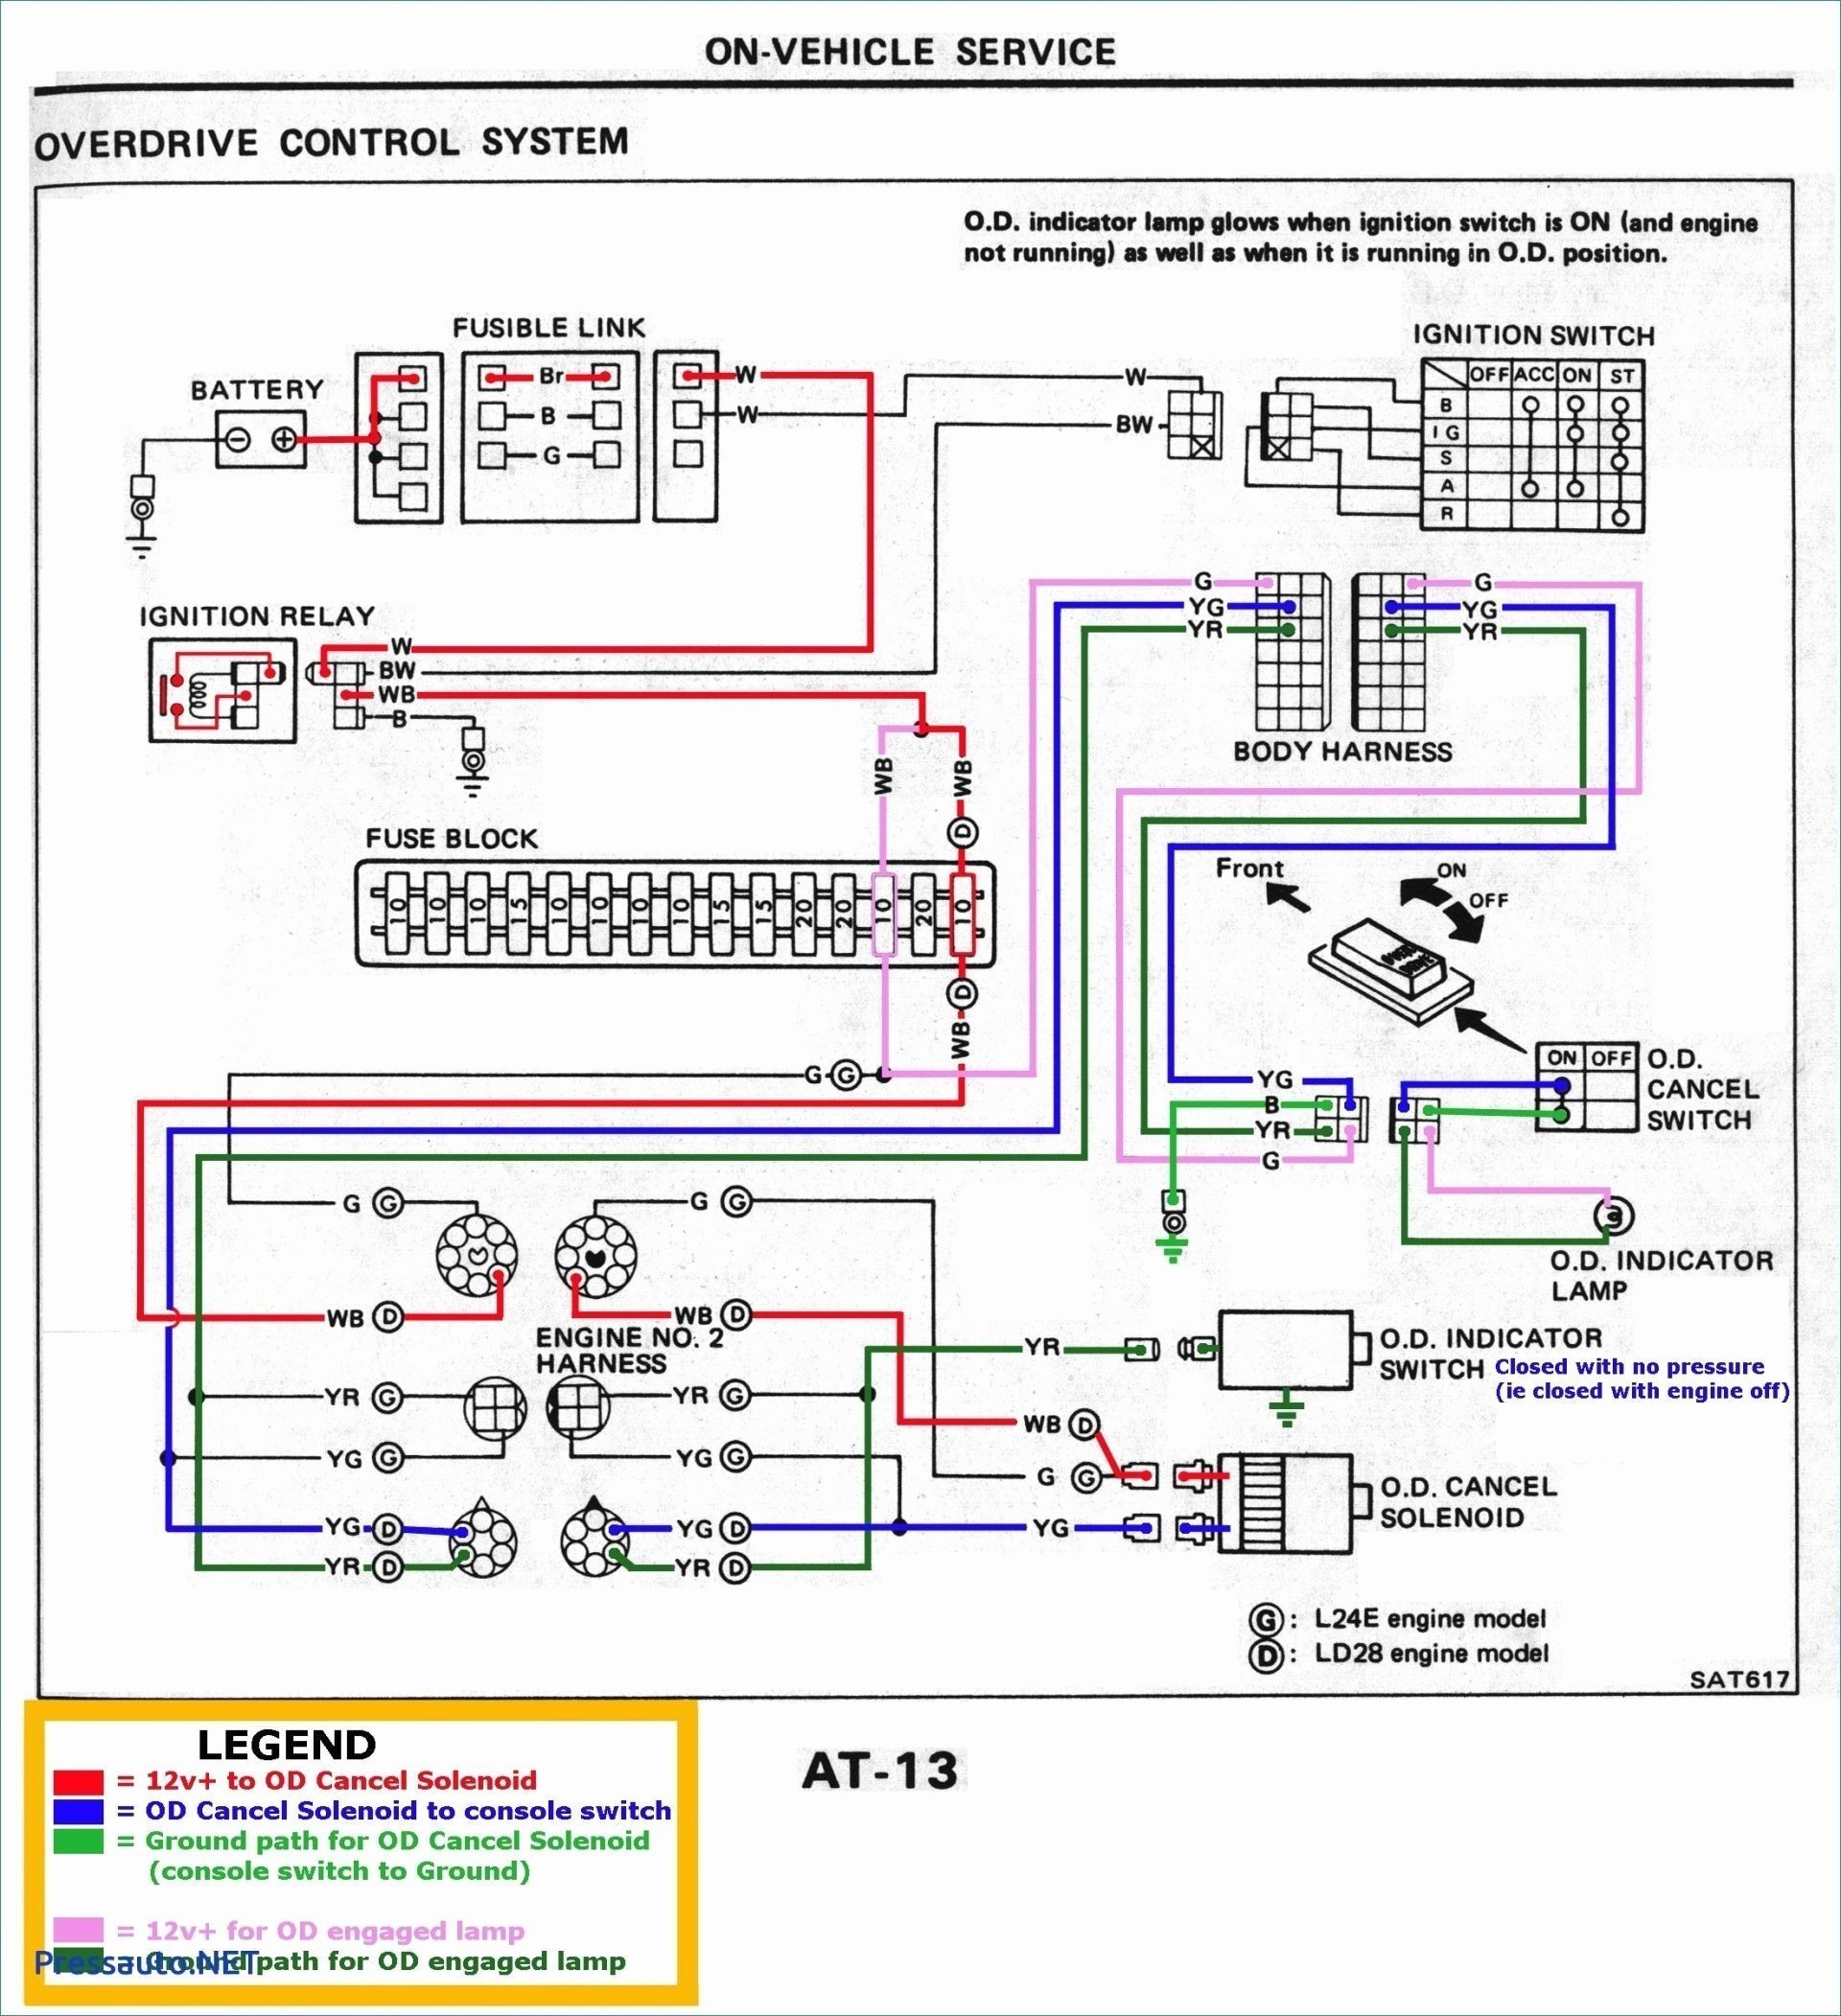 Electric Vehicle Diagram Wiring Diagram for Ac Motor Best Wiring Diagram 3 Phase Electric Of Electric Vehicle Diagram